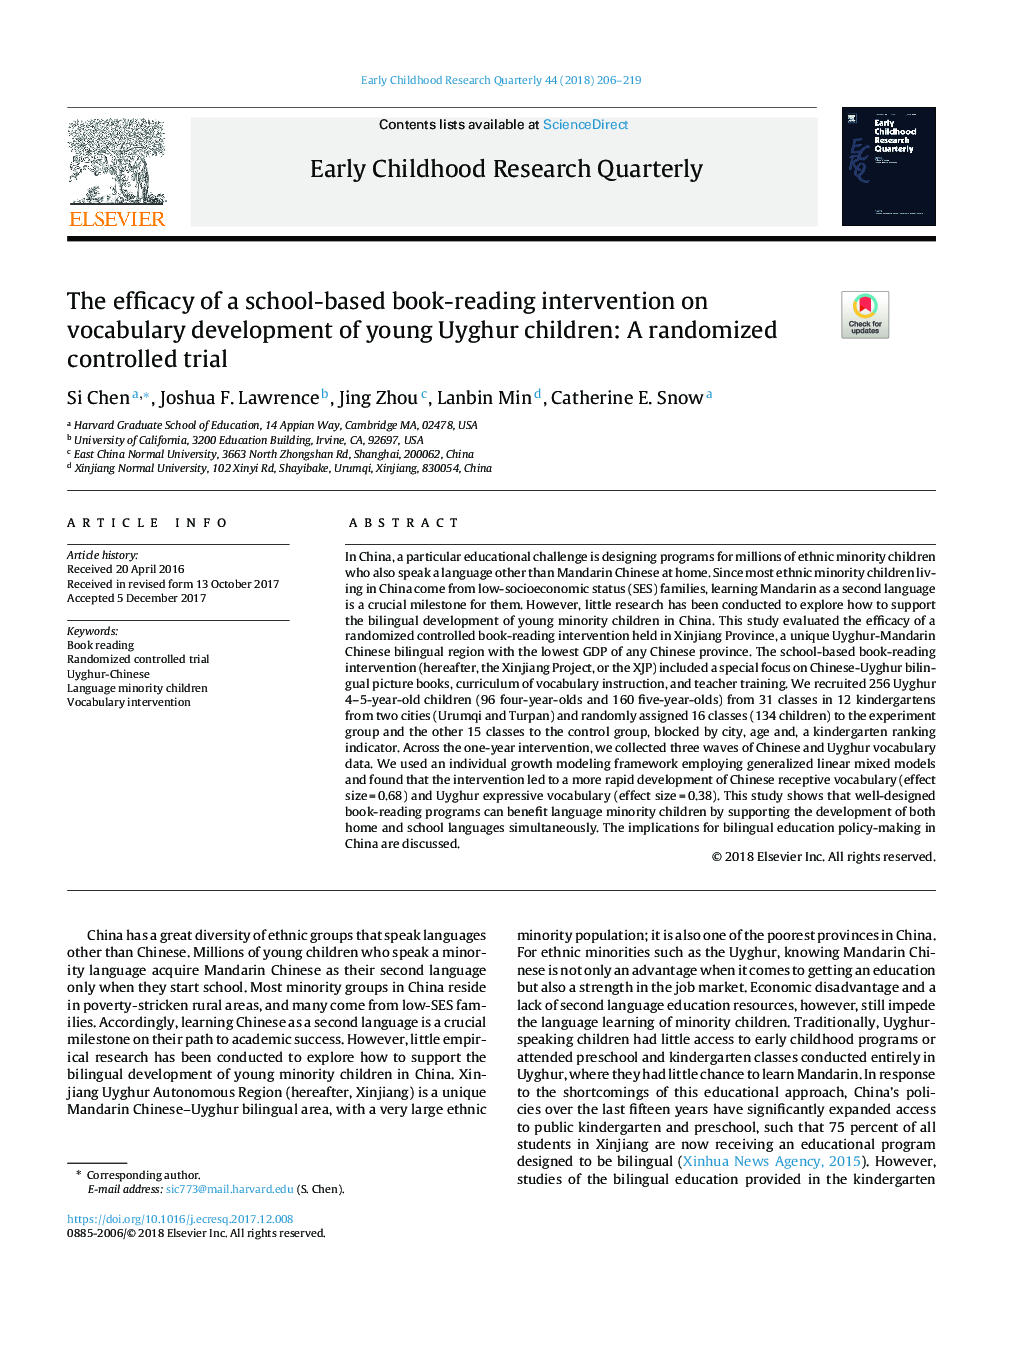 The efficacy of a school-based book-reading intervention on vocabulary development of young Uyghur children: A randomized controlled trial